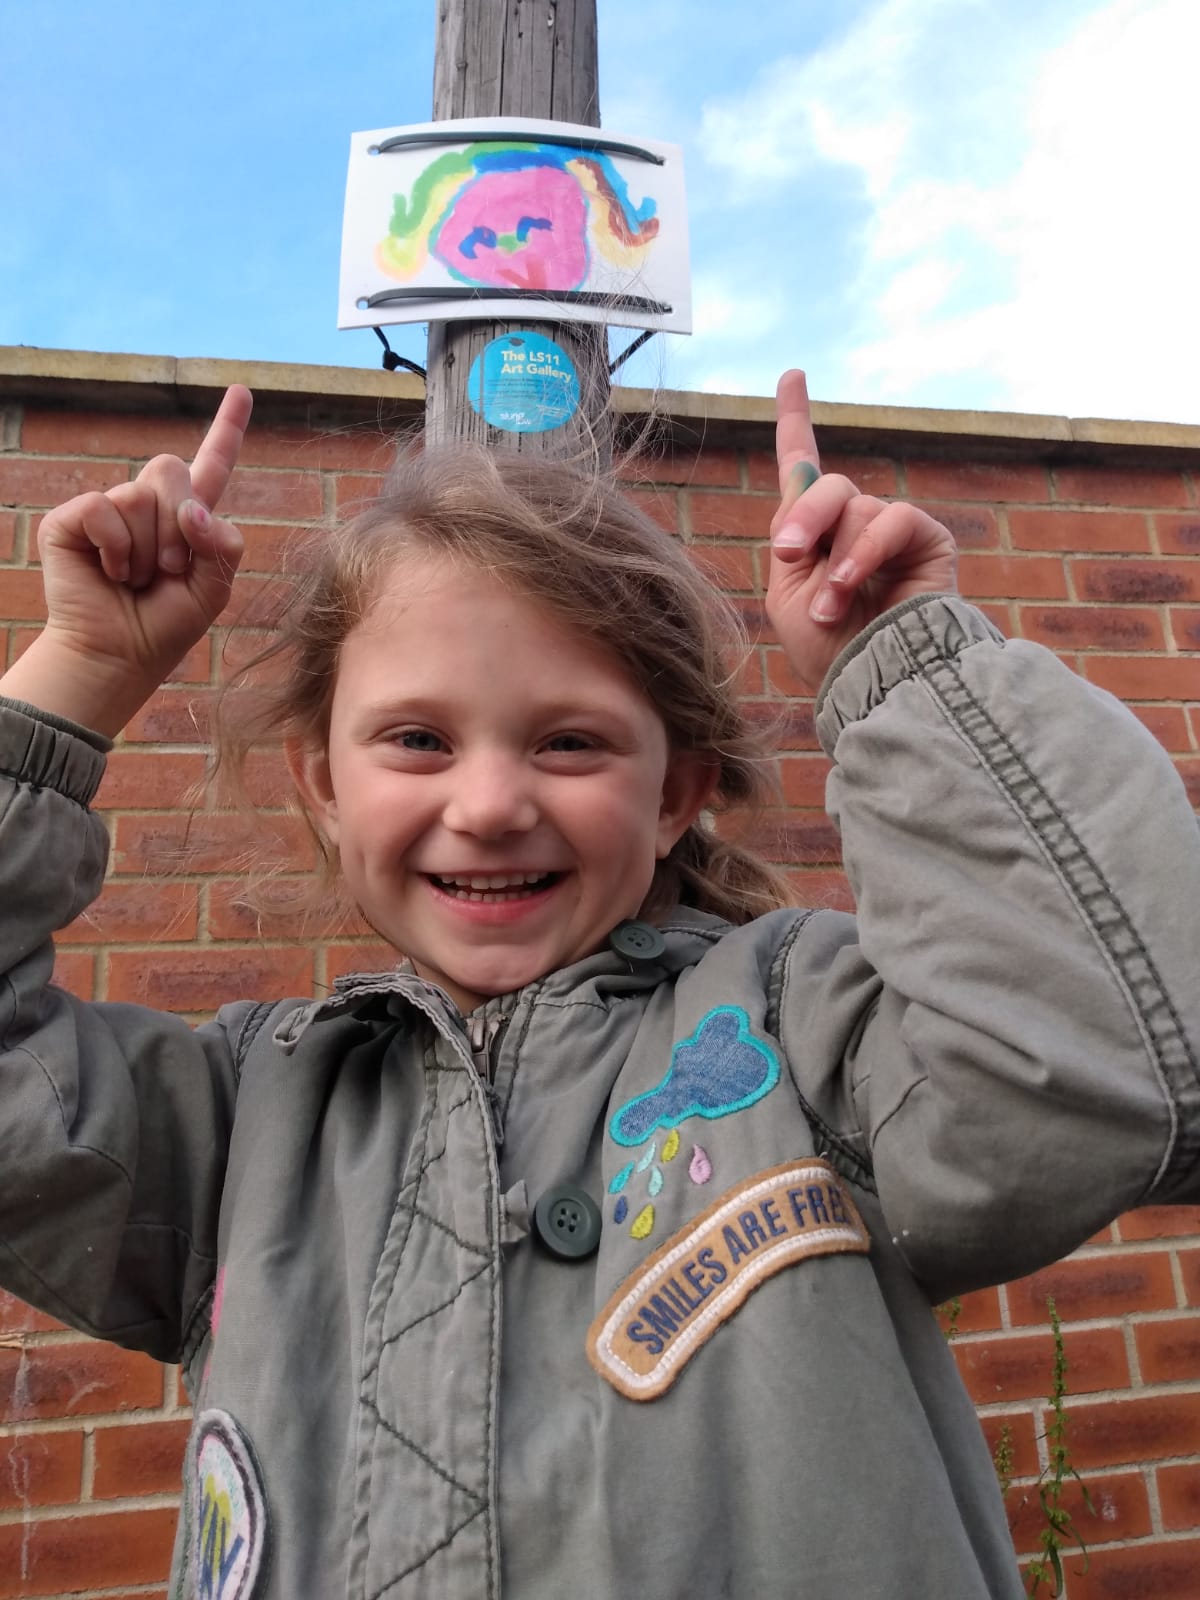 Young girl photographed in front of a lamppost, pointing with both hands up to her hand-drawn picture which has been displayed on the lamppost. She is smiling at the camera.